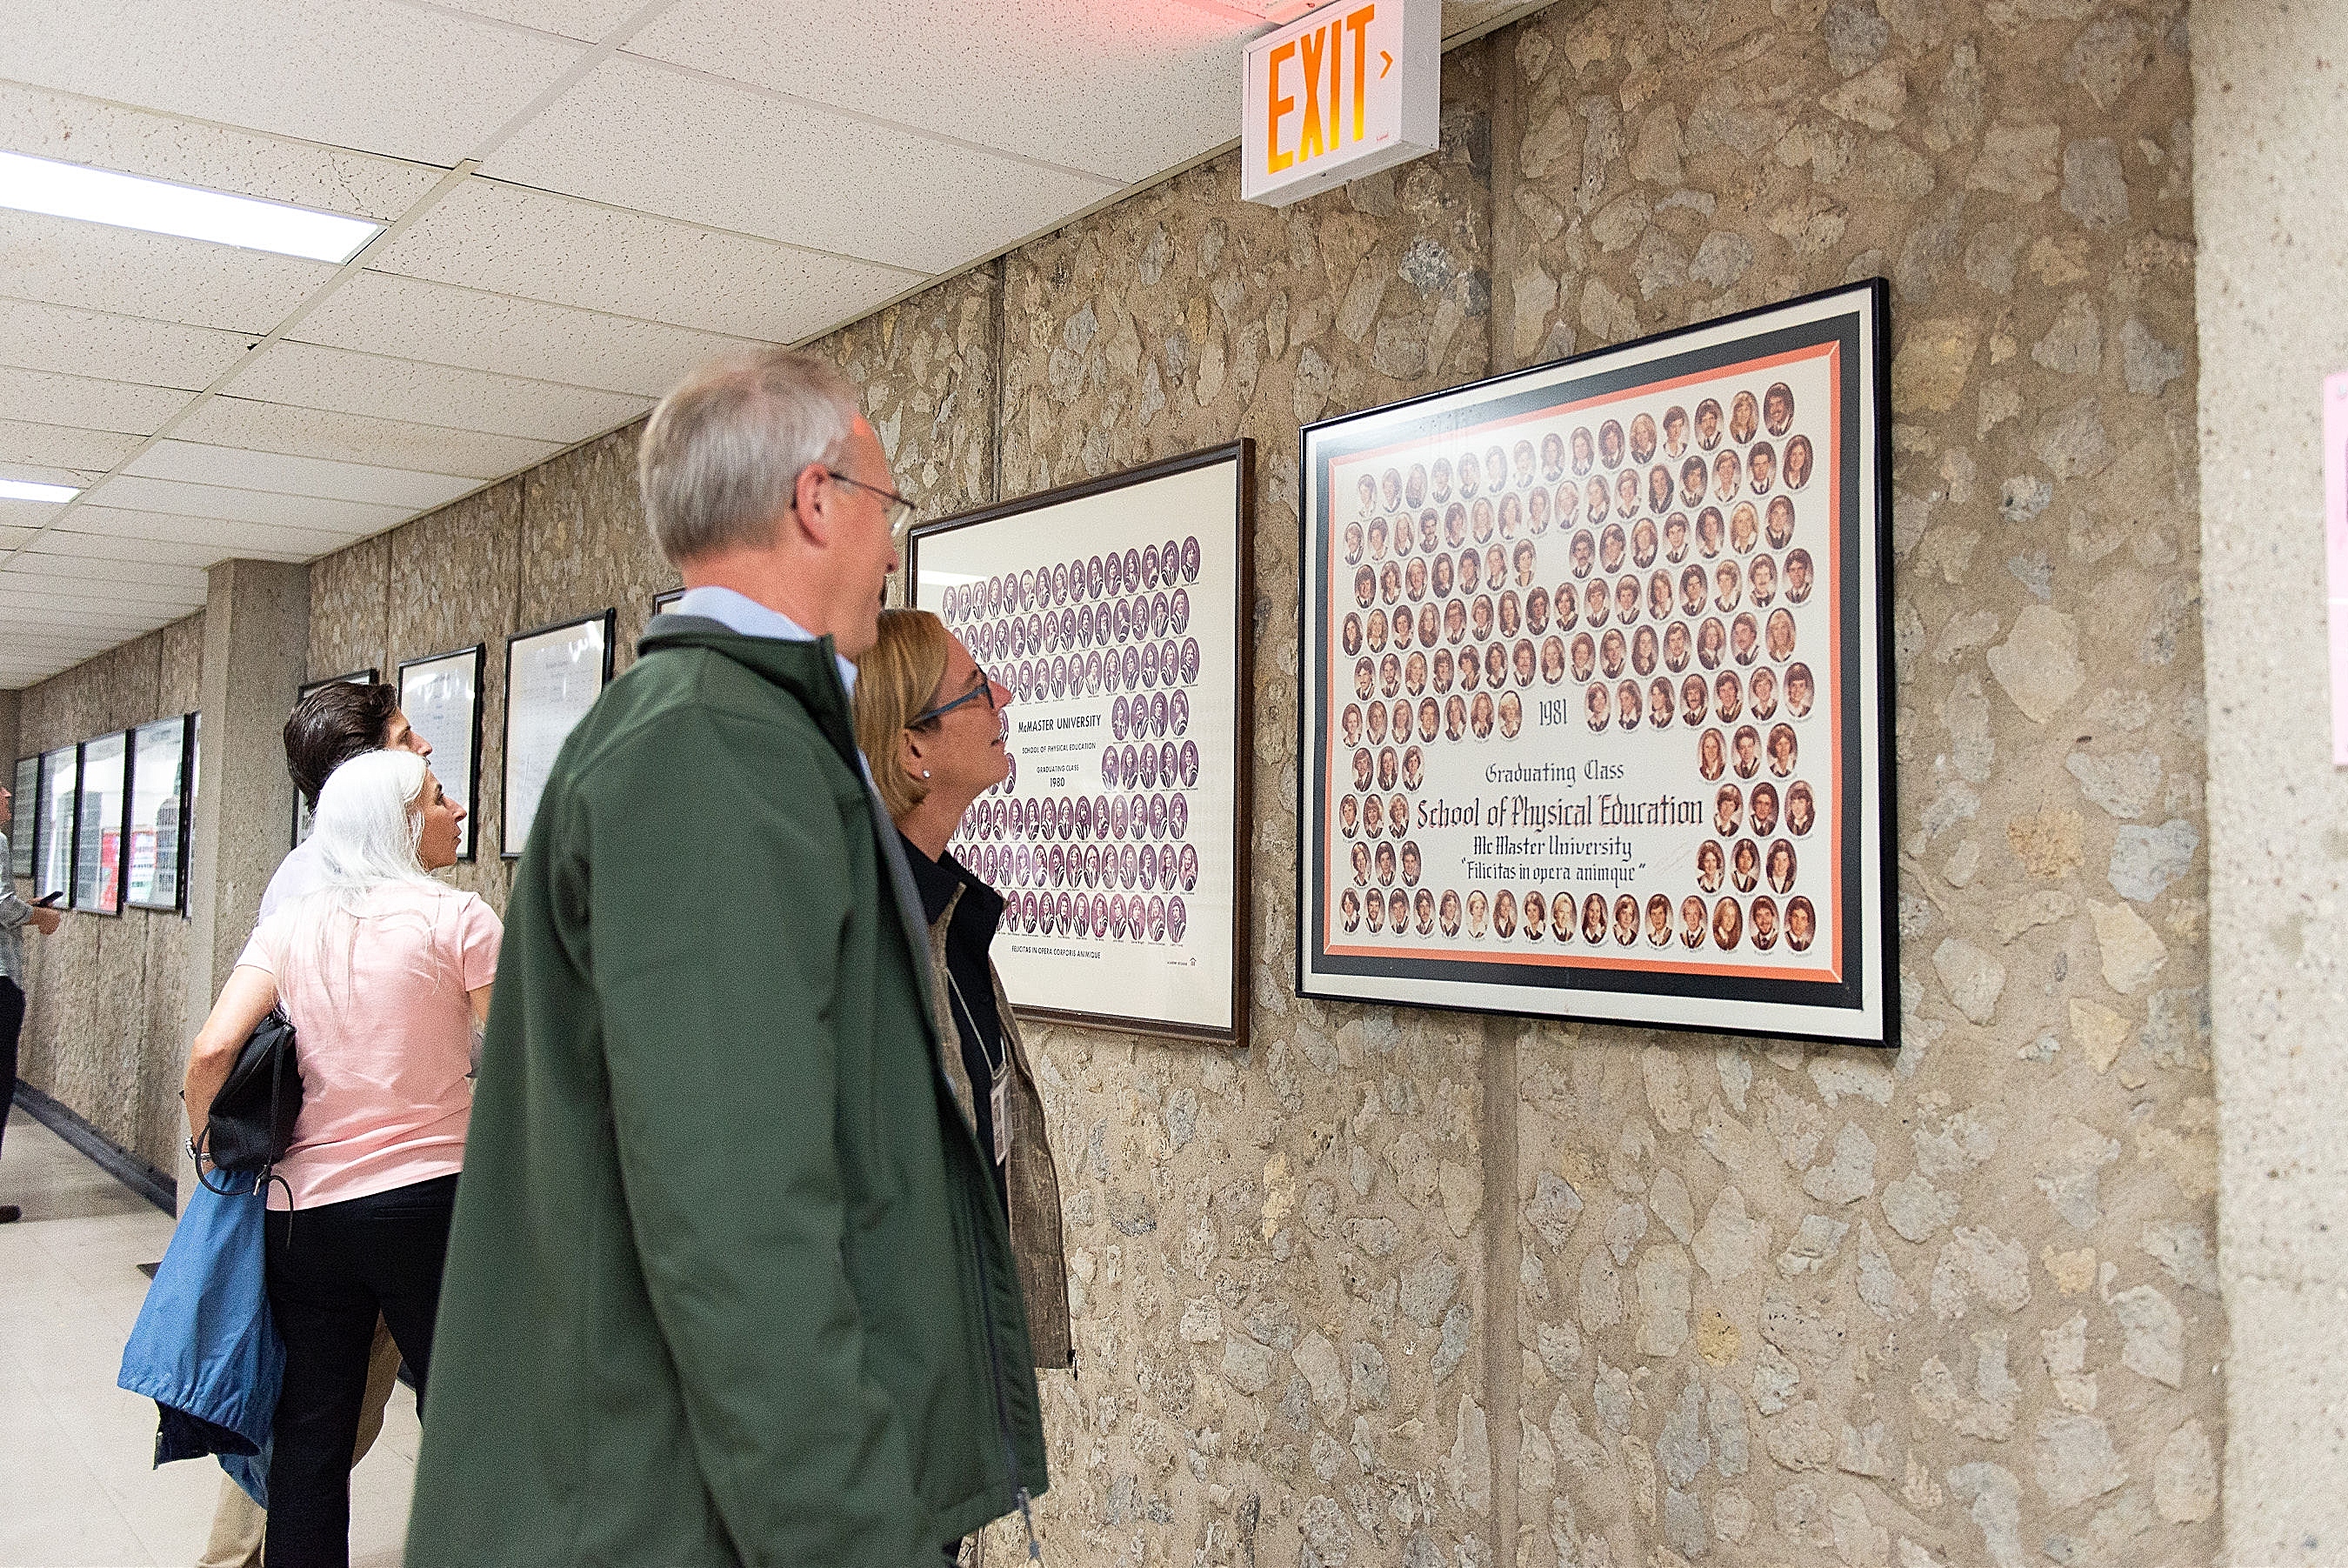 Alumni look at class photos in the hall of the Ivor Wynne Centre.